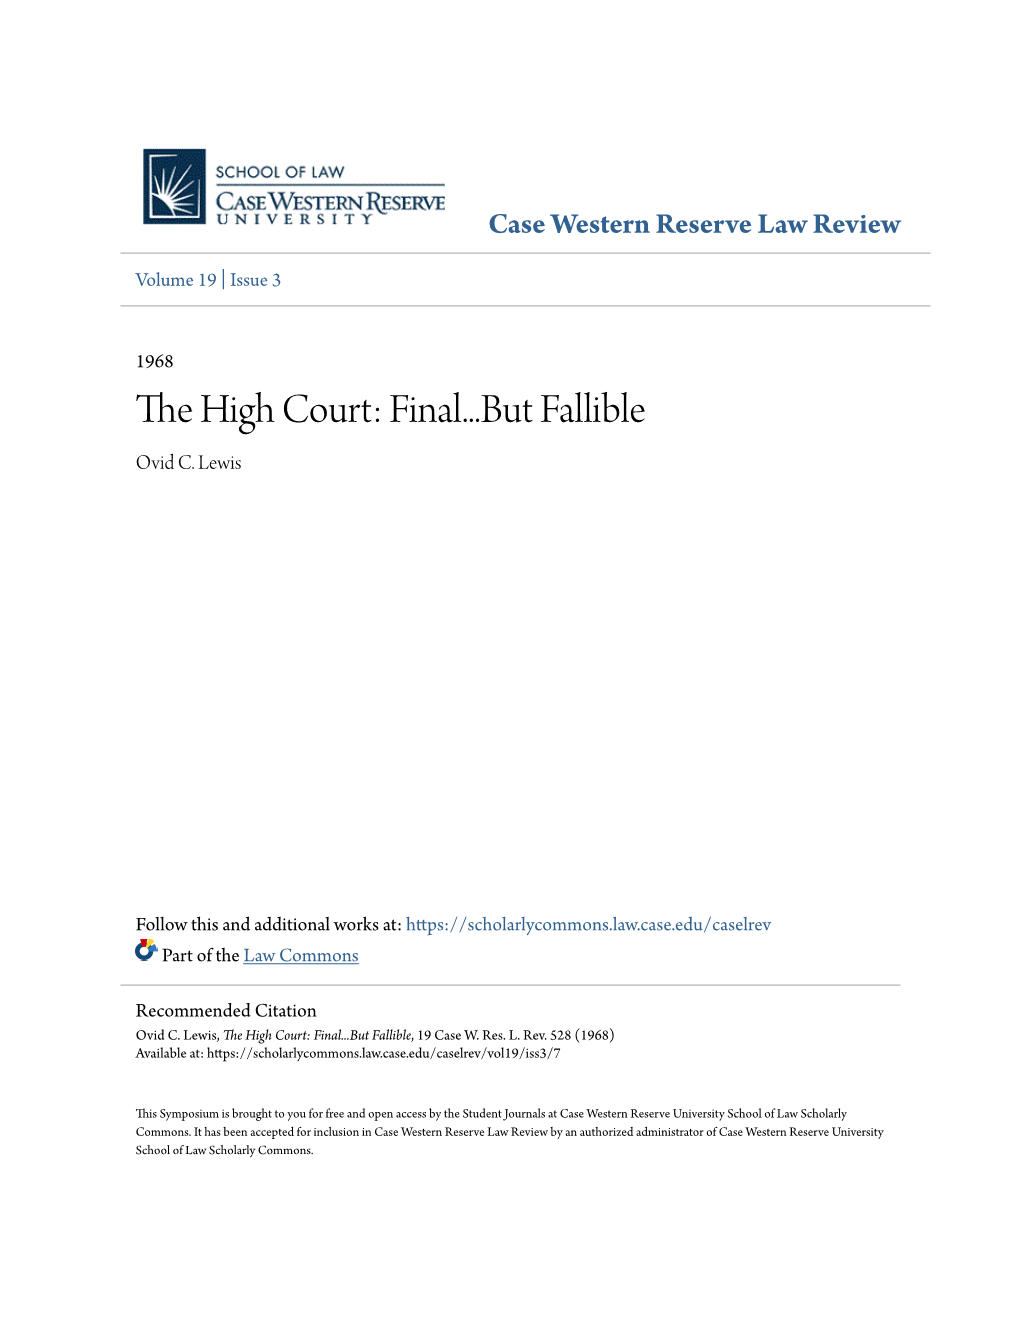 The High Court: Final...But Fallible, 19 Case W